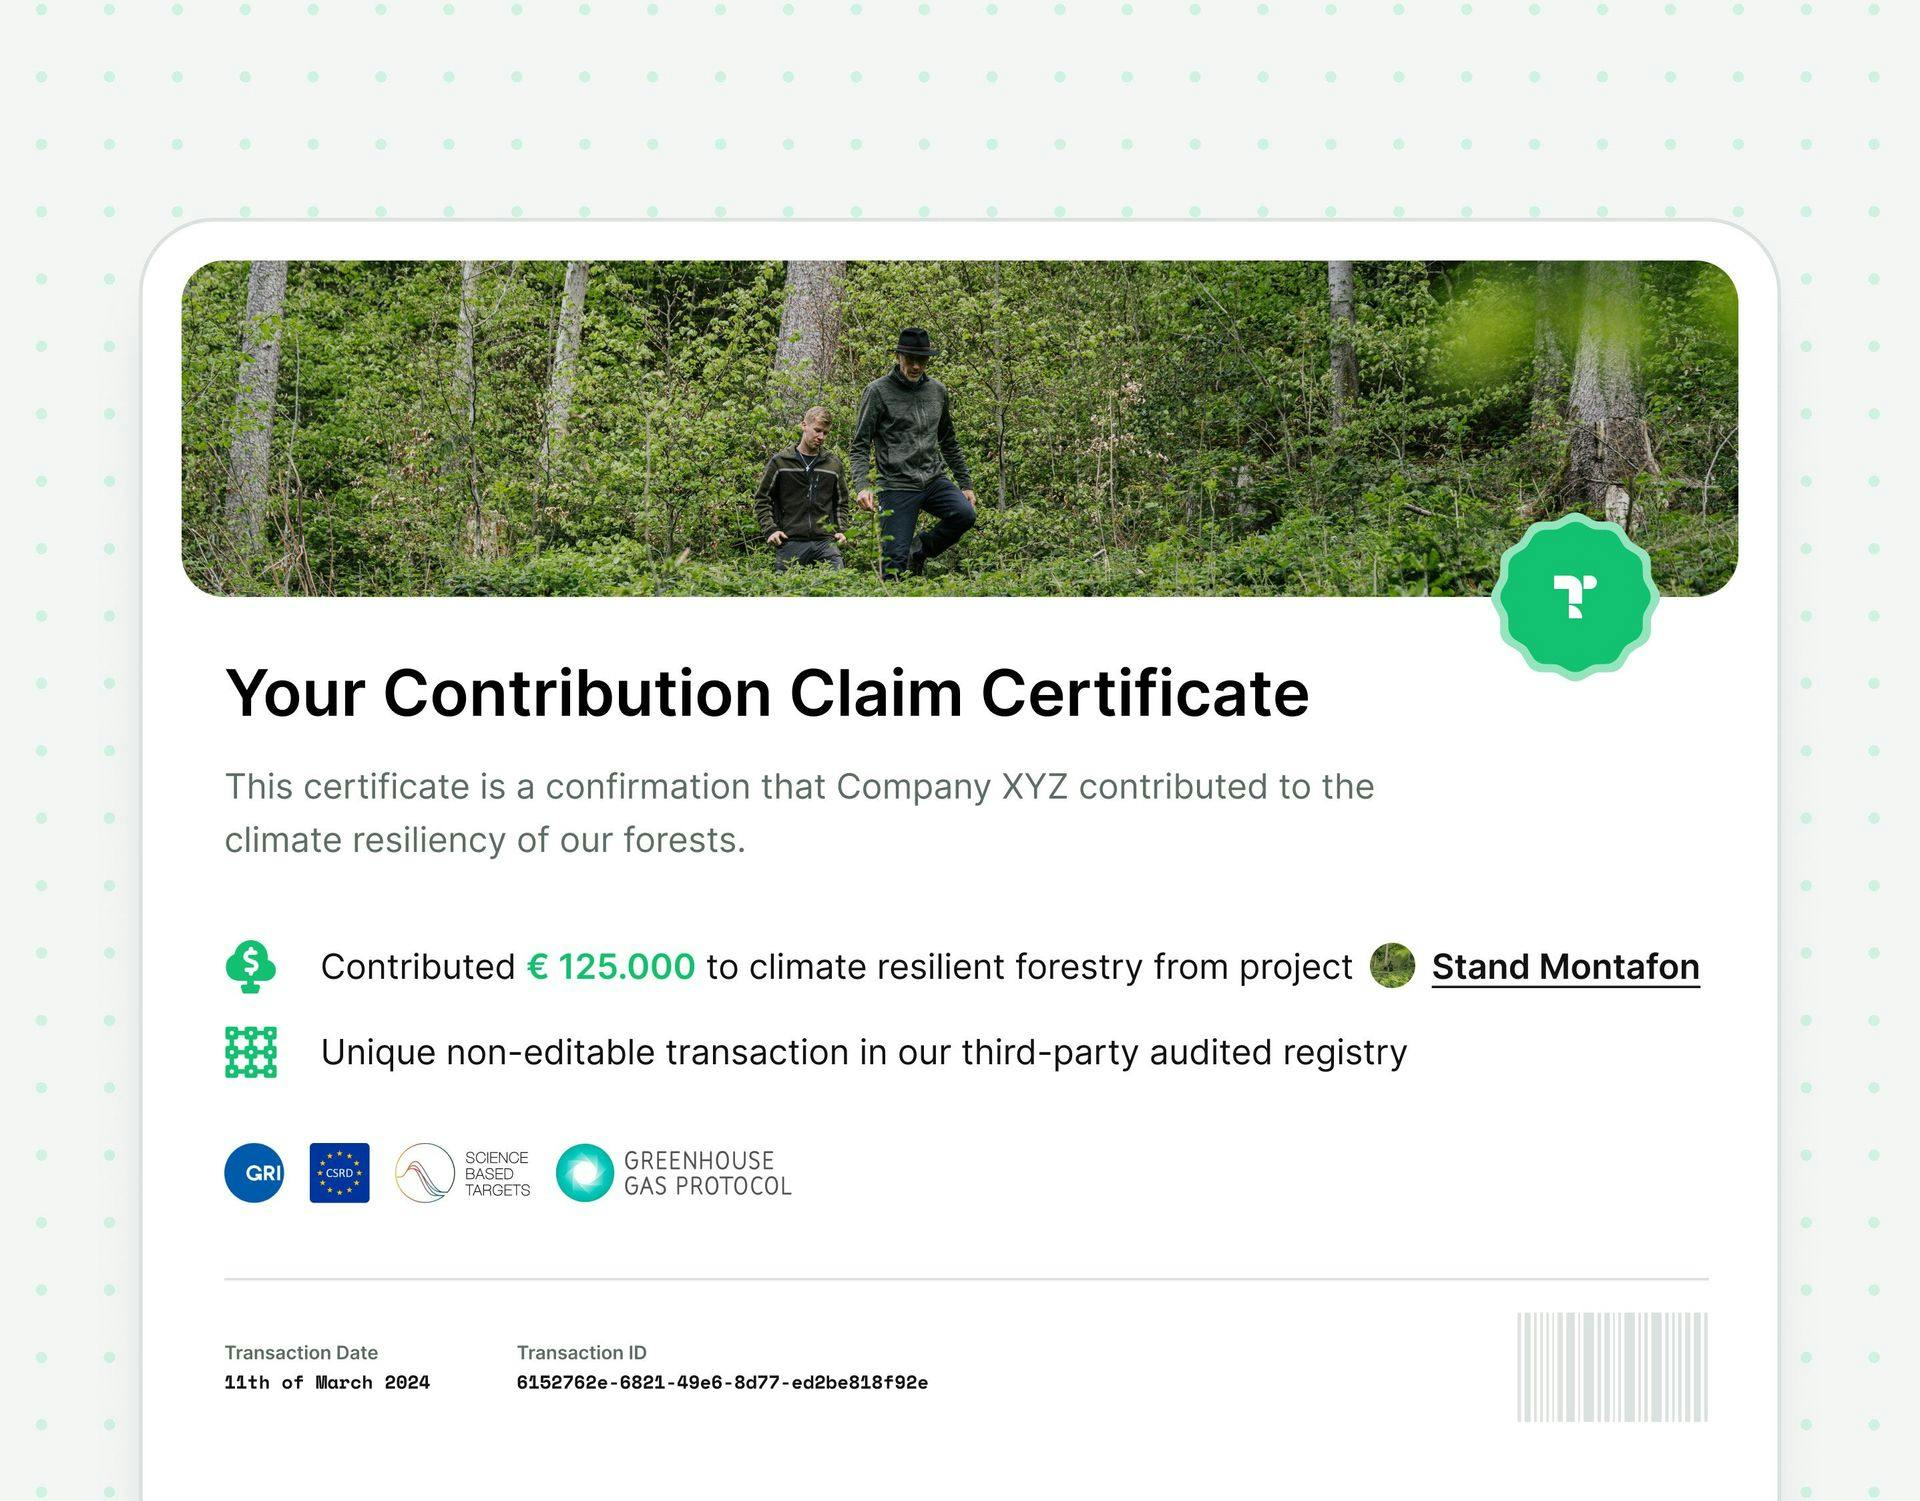 An example contribution claim certificate